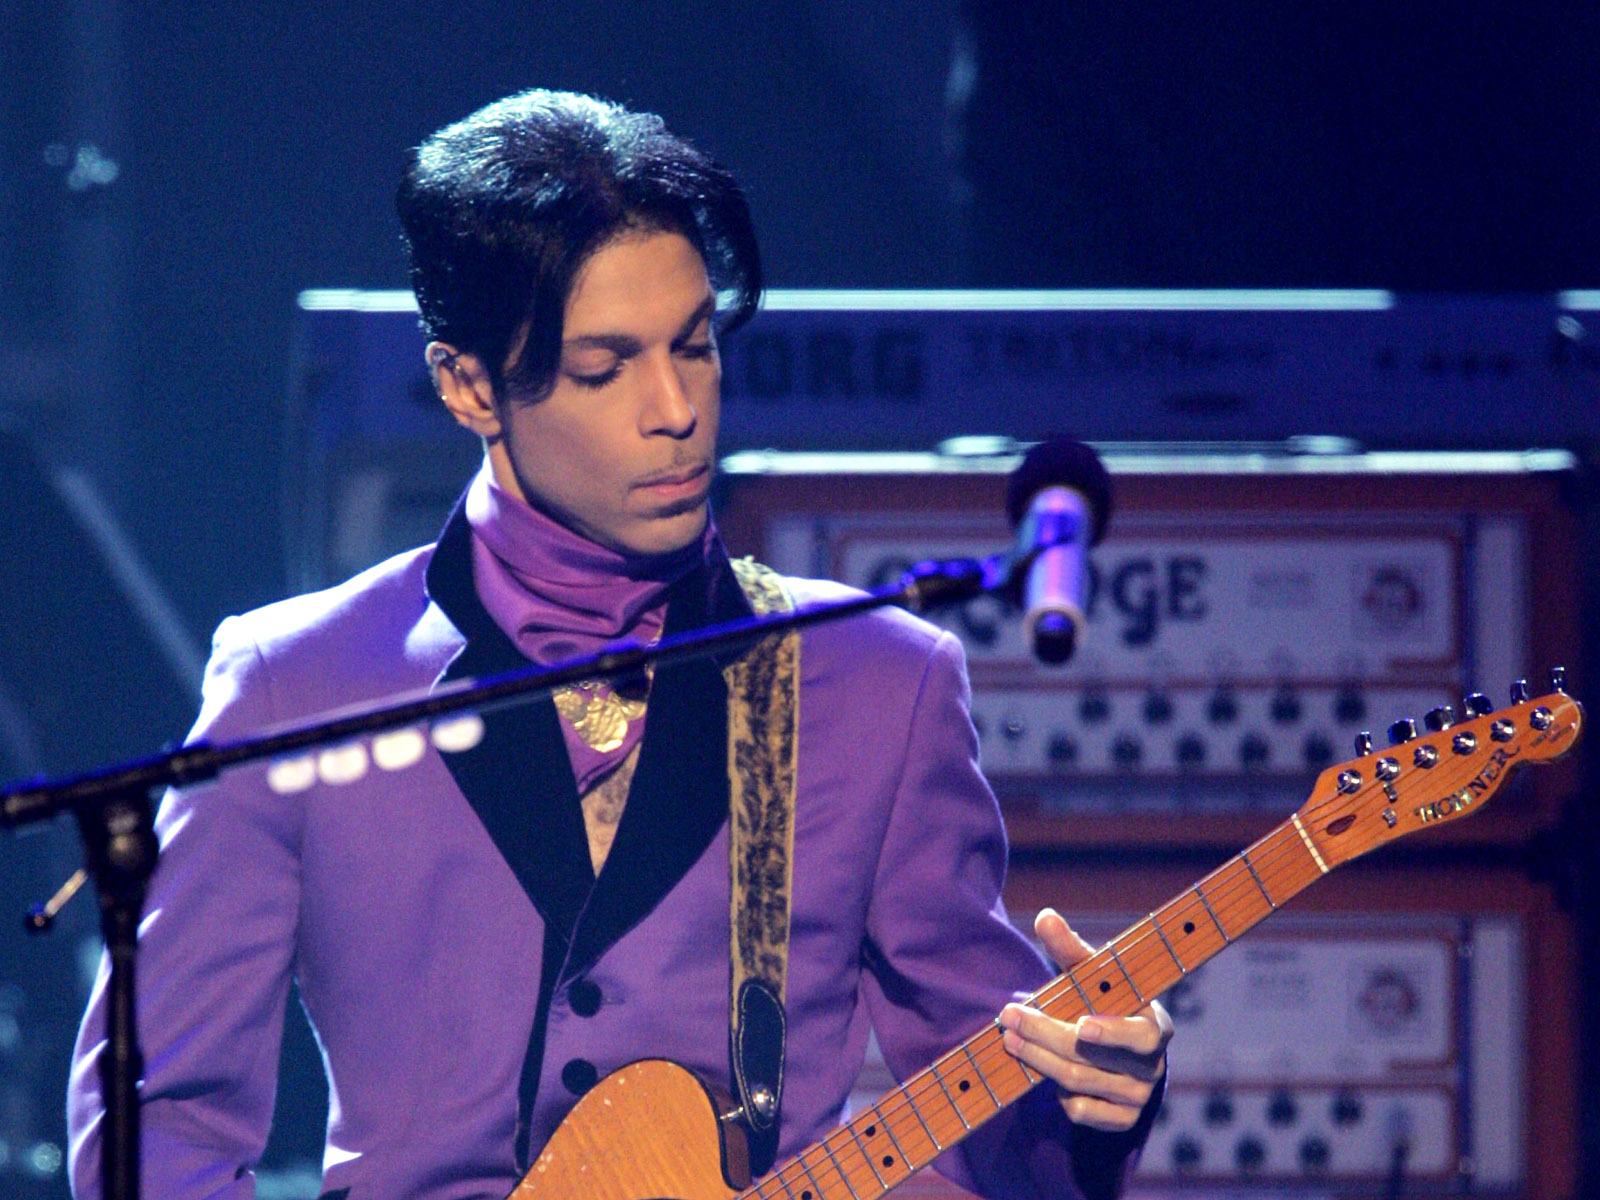 LOS ANGELES, CA - JUNE 27: Musician Prince performs onstage at the 2006 BET Awards at the Shrine Auditorium on June 27, 2006 in Los Angeles, California. (Photo by Frazer Harrison/Getty Images)